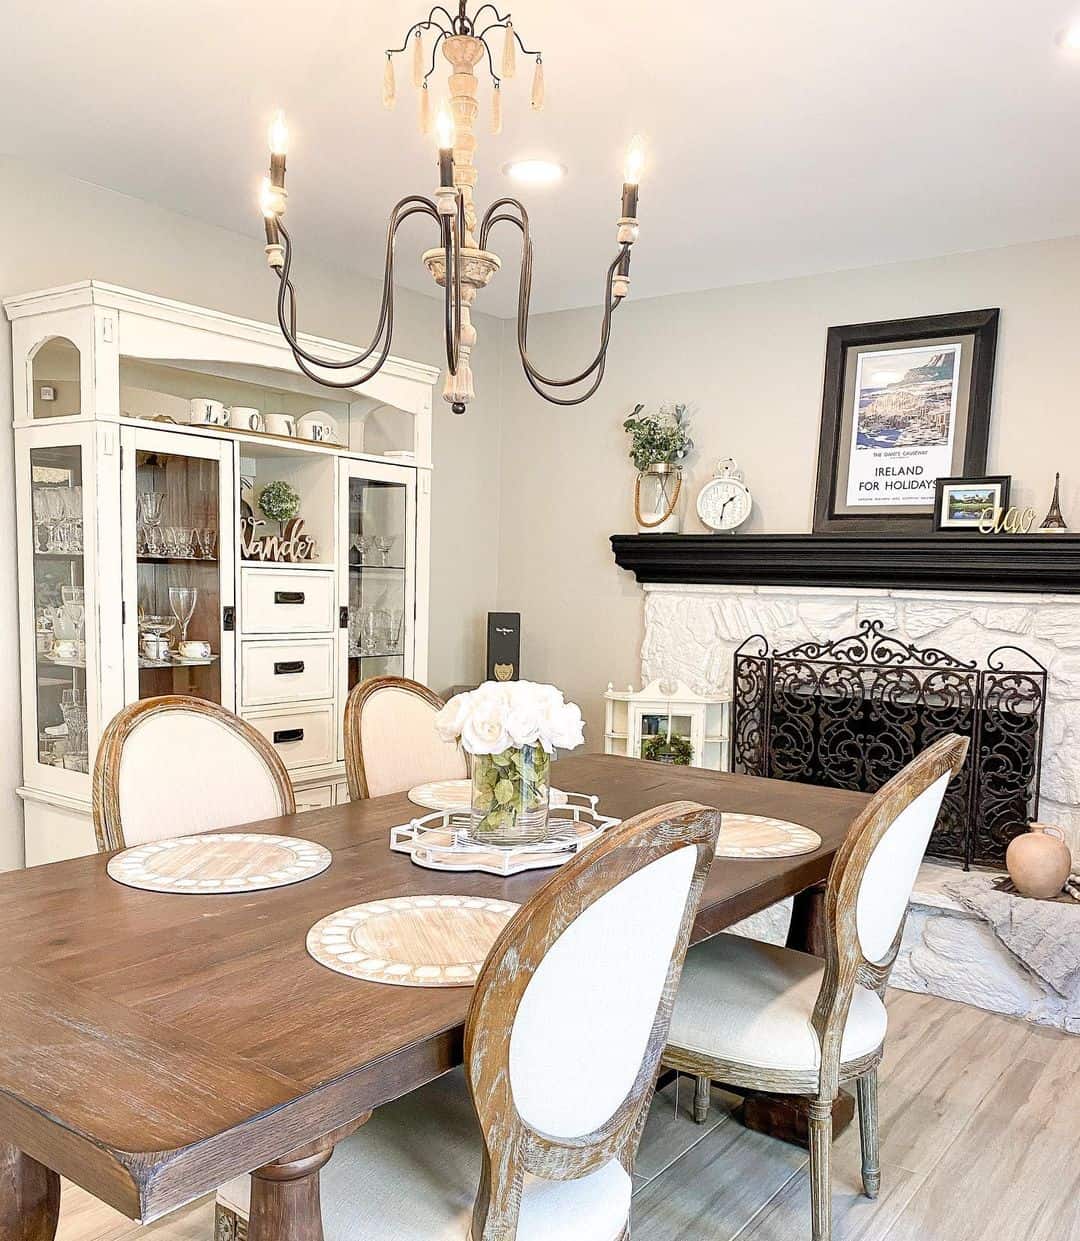 Dining Room With White Stone Fireplace - Soul & Lane